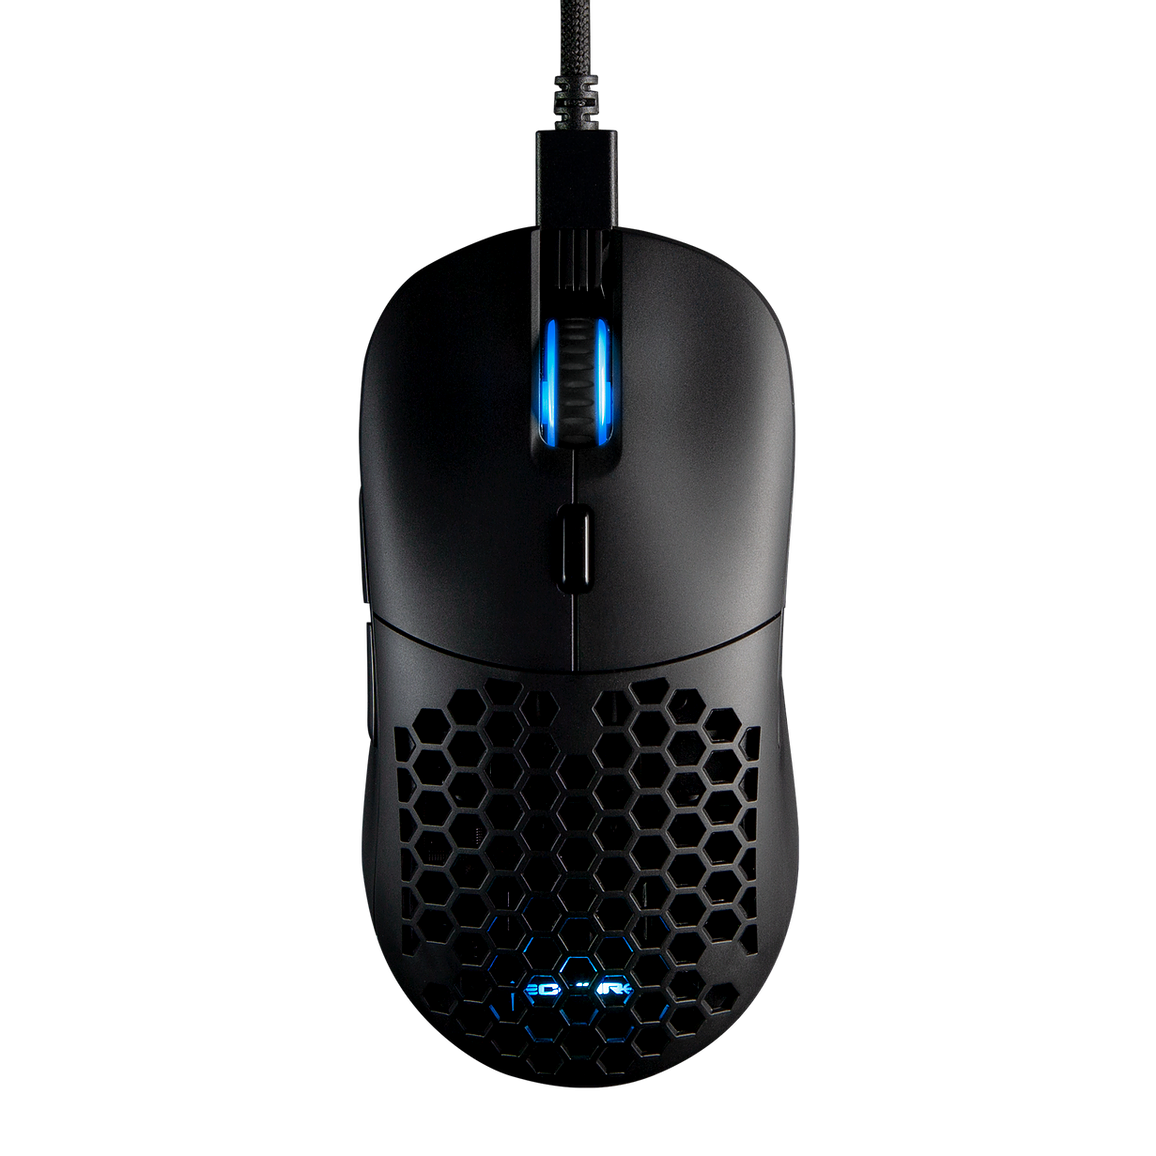 Tecware Pulse - Wireless Ambidextrous RGB Gaming Mouse